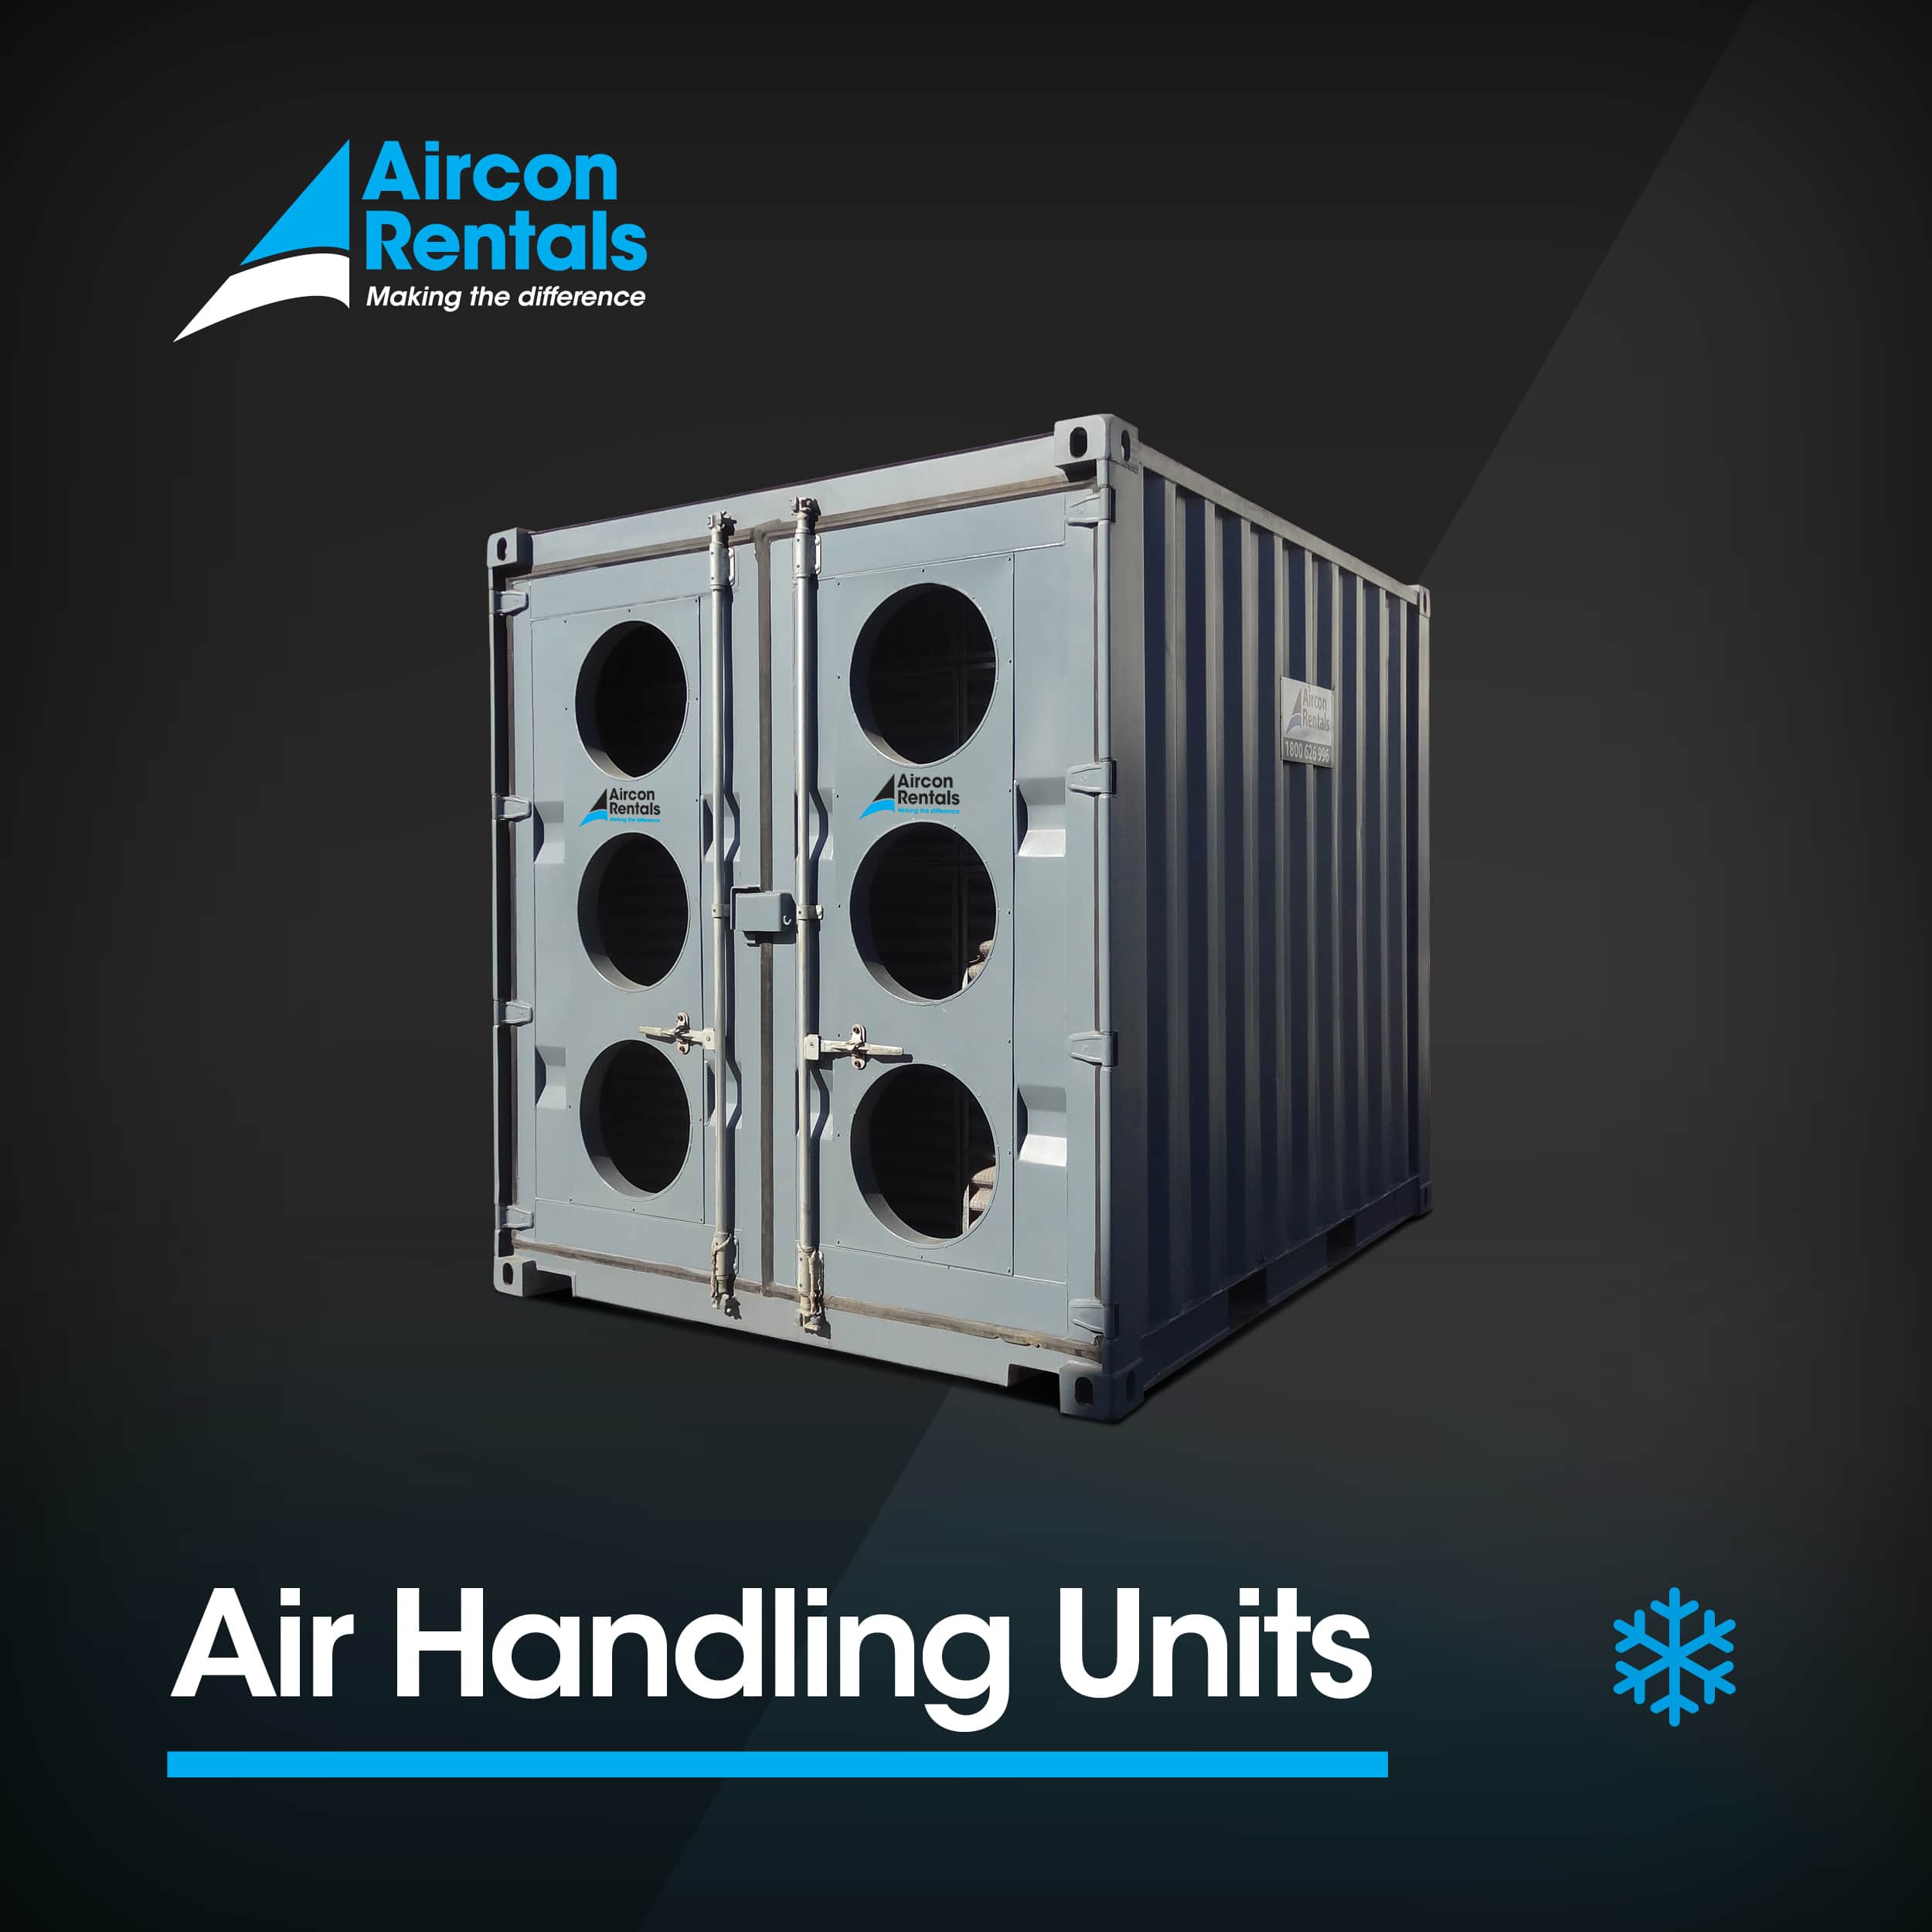 HVAC and Power are Vital in Operating Rooms | Aircon Rentals